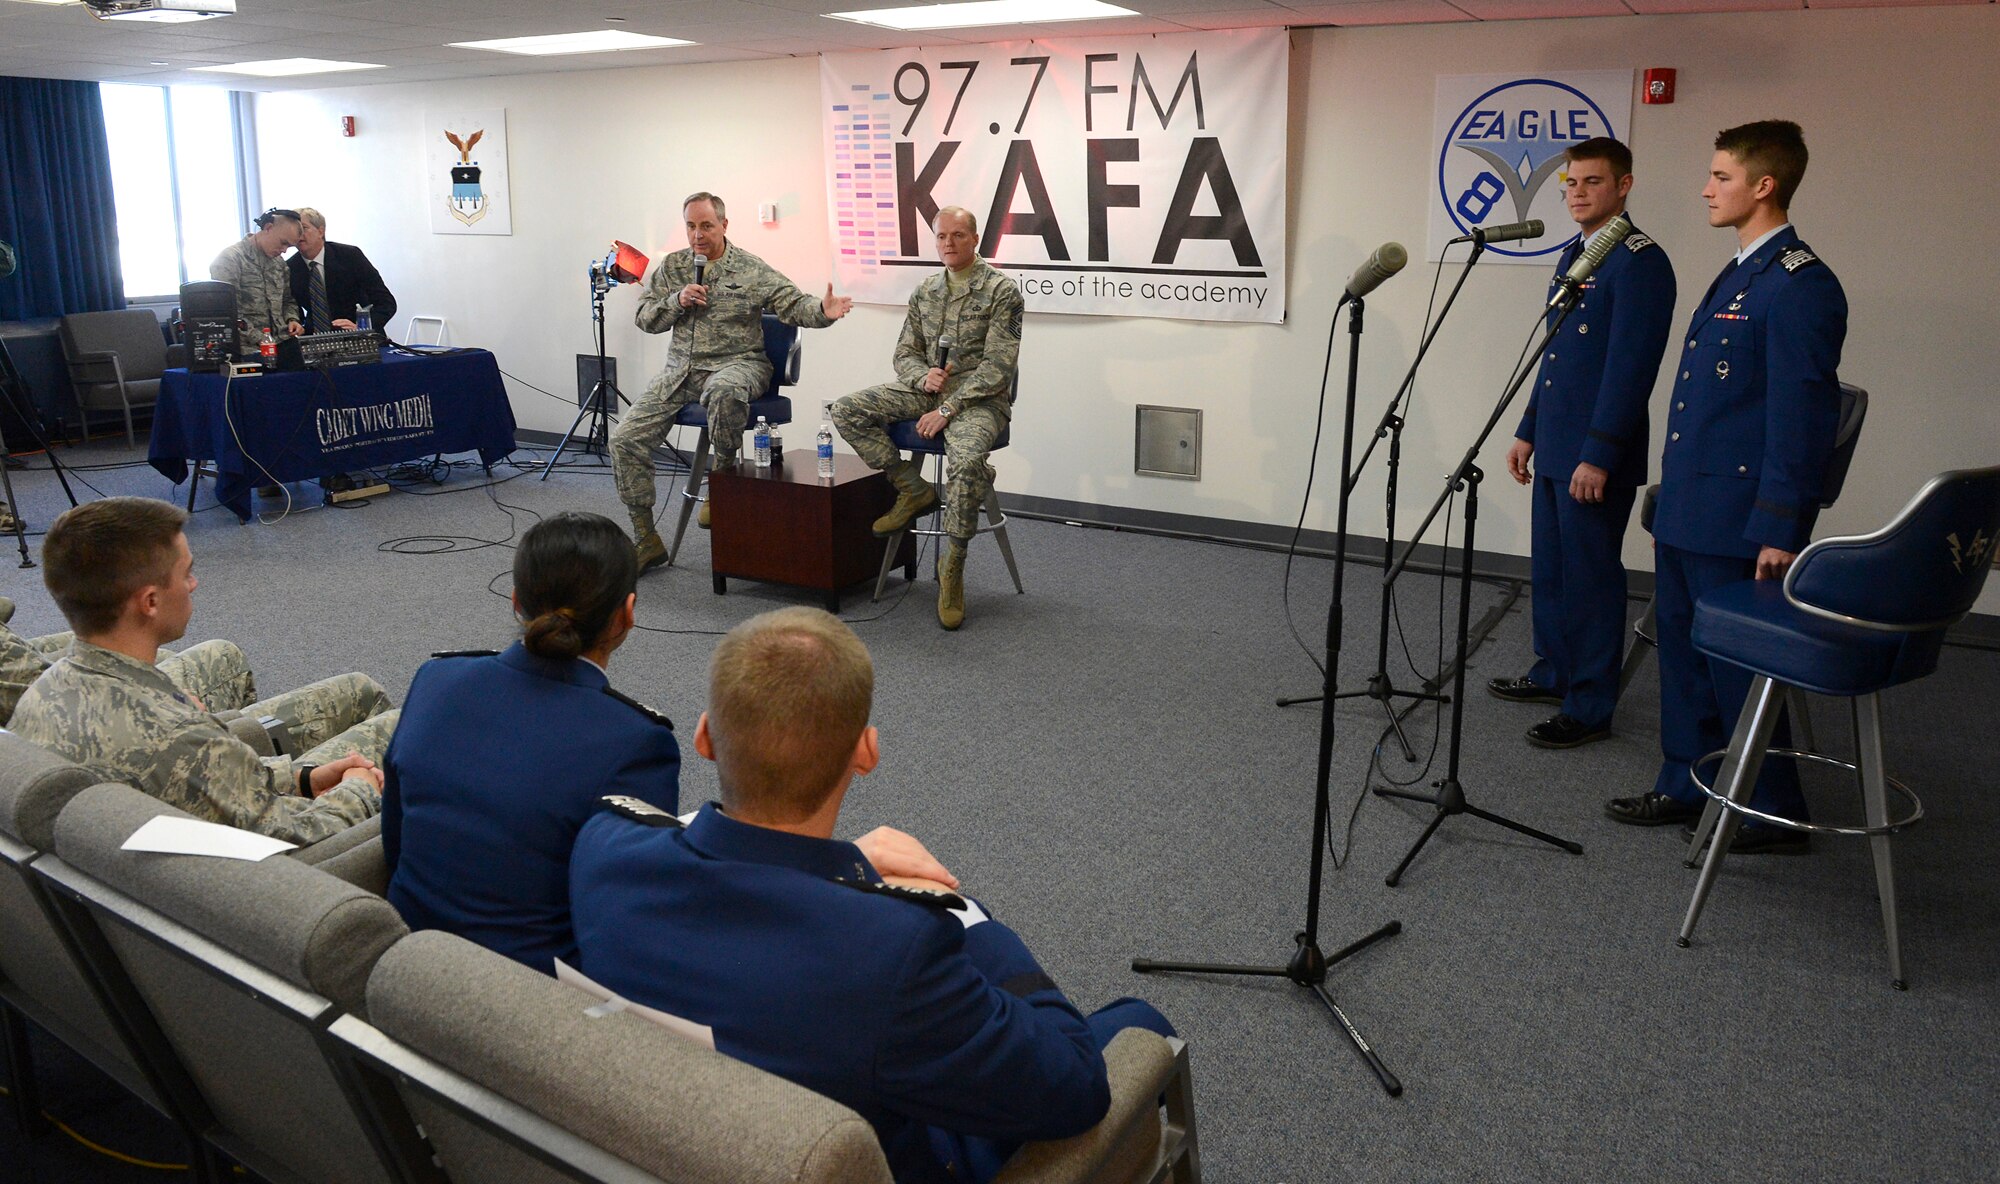 Air Force Chief of Staff Gen. Mark A. Welsh III and Chief Master Sgt. of the Air Force James A. Cody answer questions during “Stars and Chevrons,” a show on the U.S. Air Force Academy cadet-run radio station, KAFA 97.7 FM, Oct. 29, 2013, Colorado Springs, Colo. Welsh and Cody answered questions from budget uncertainty to professional development during the hour-long show.